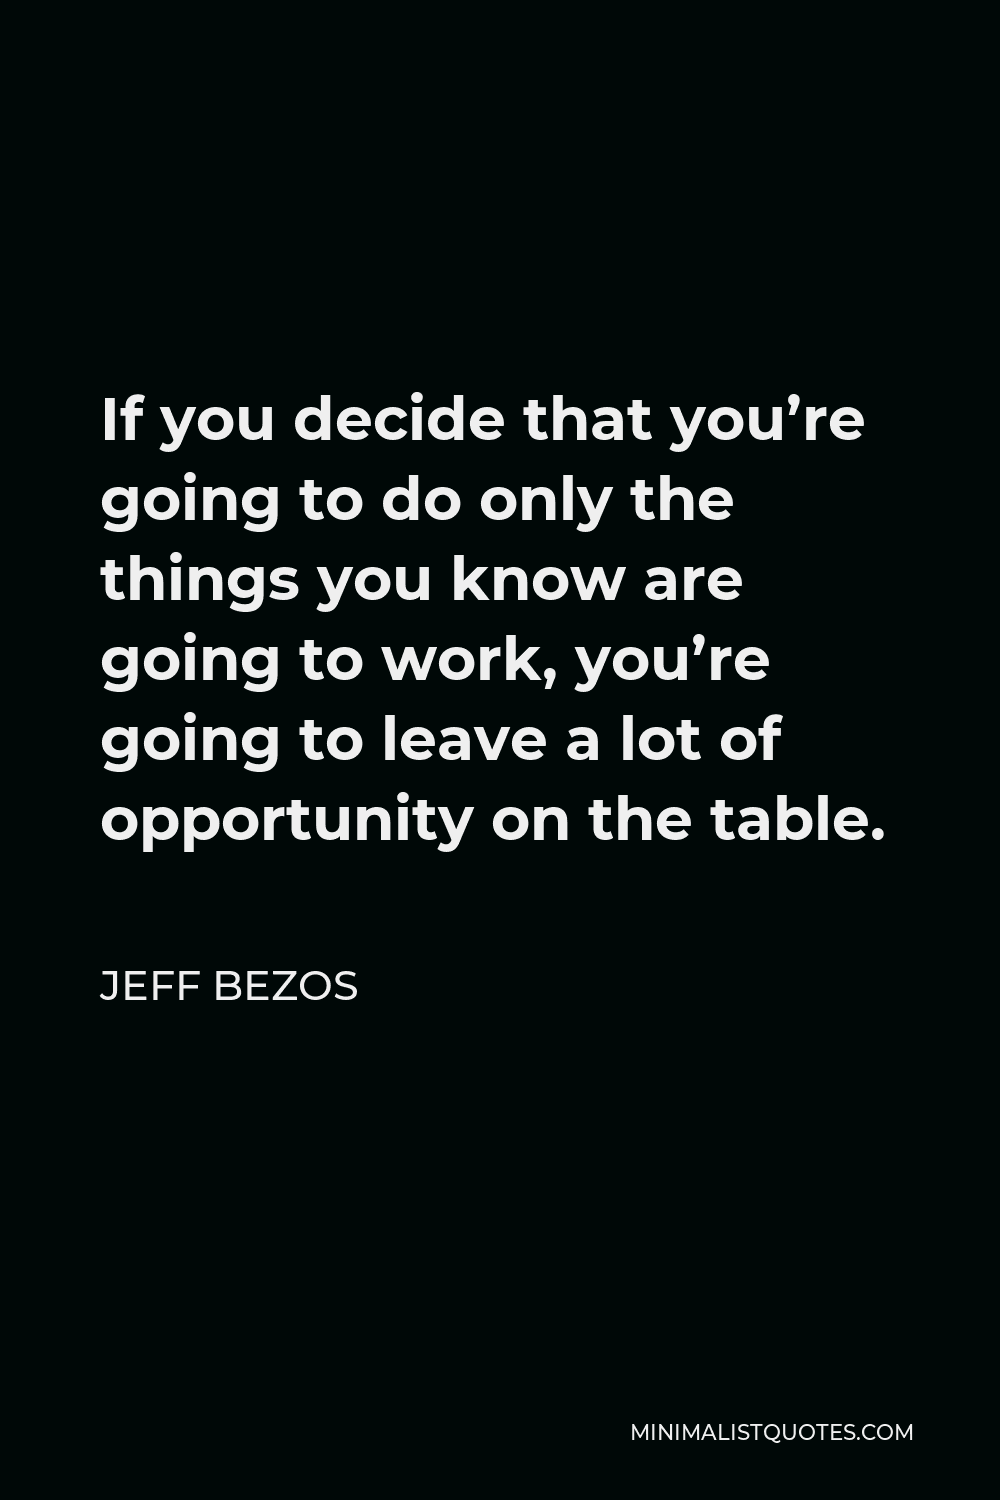 Jeff Bezos Quote - If you decide that you’re going to do only the things you know are going to work, you’re going to leave a lot of opportunity on the table.